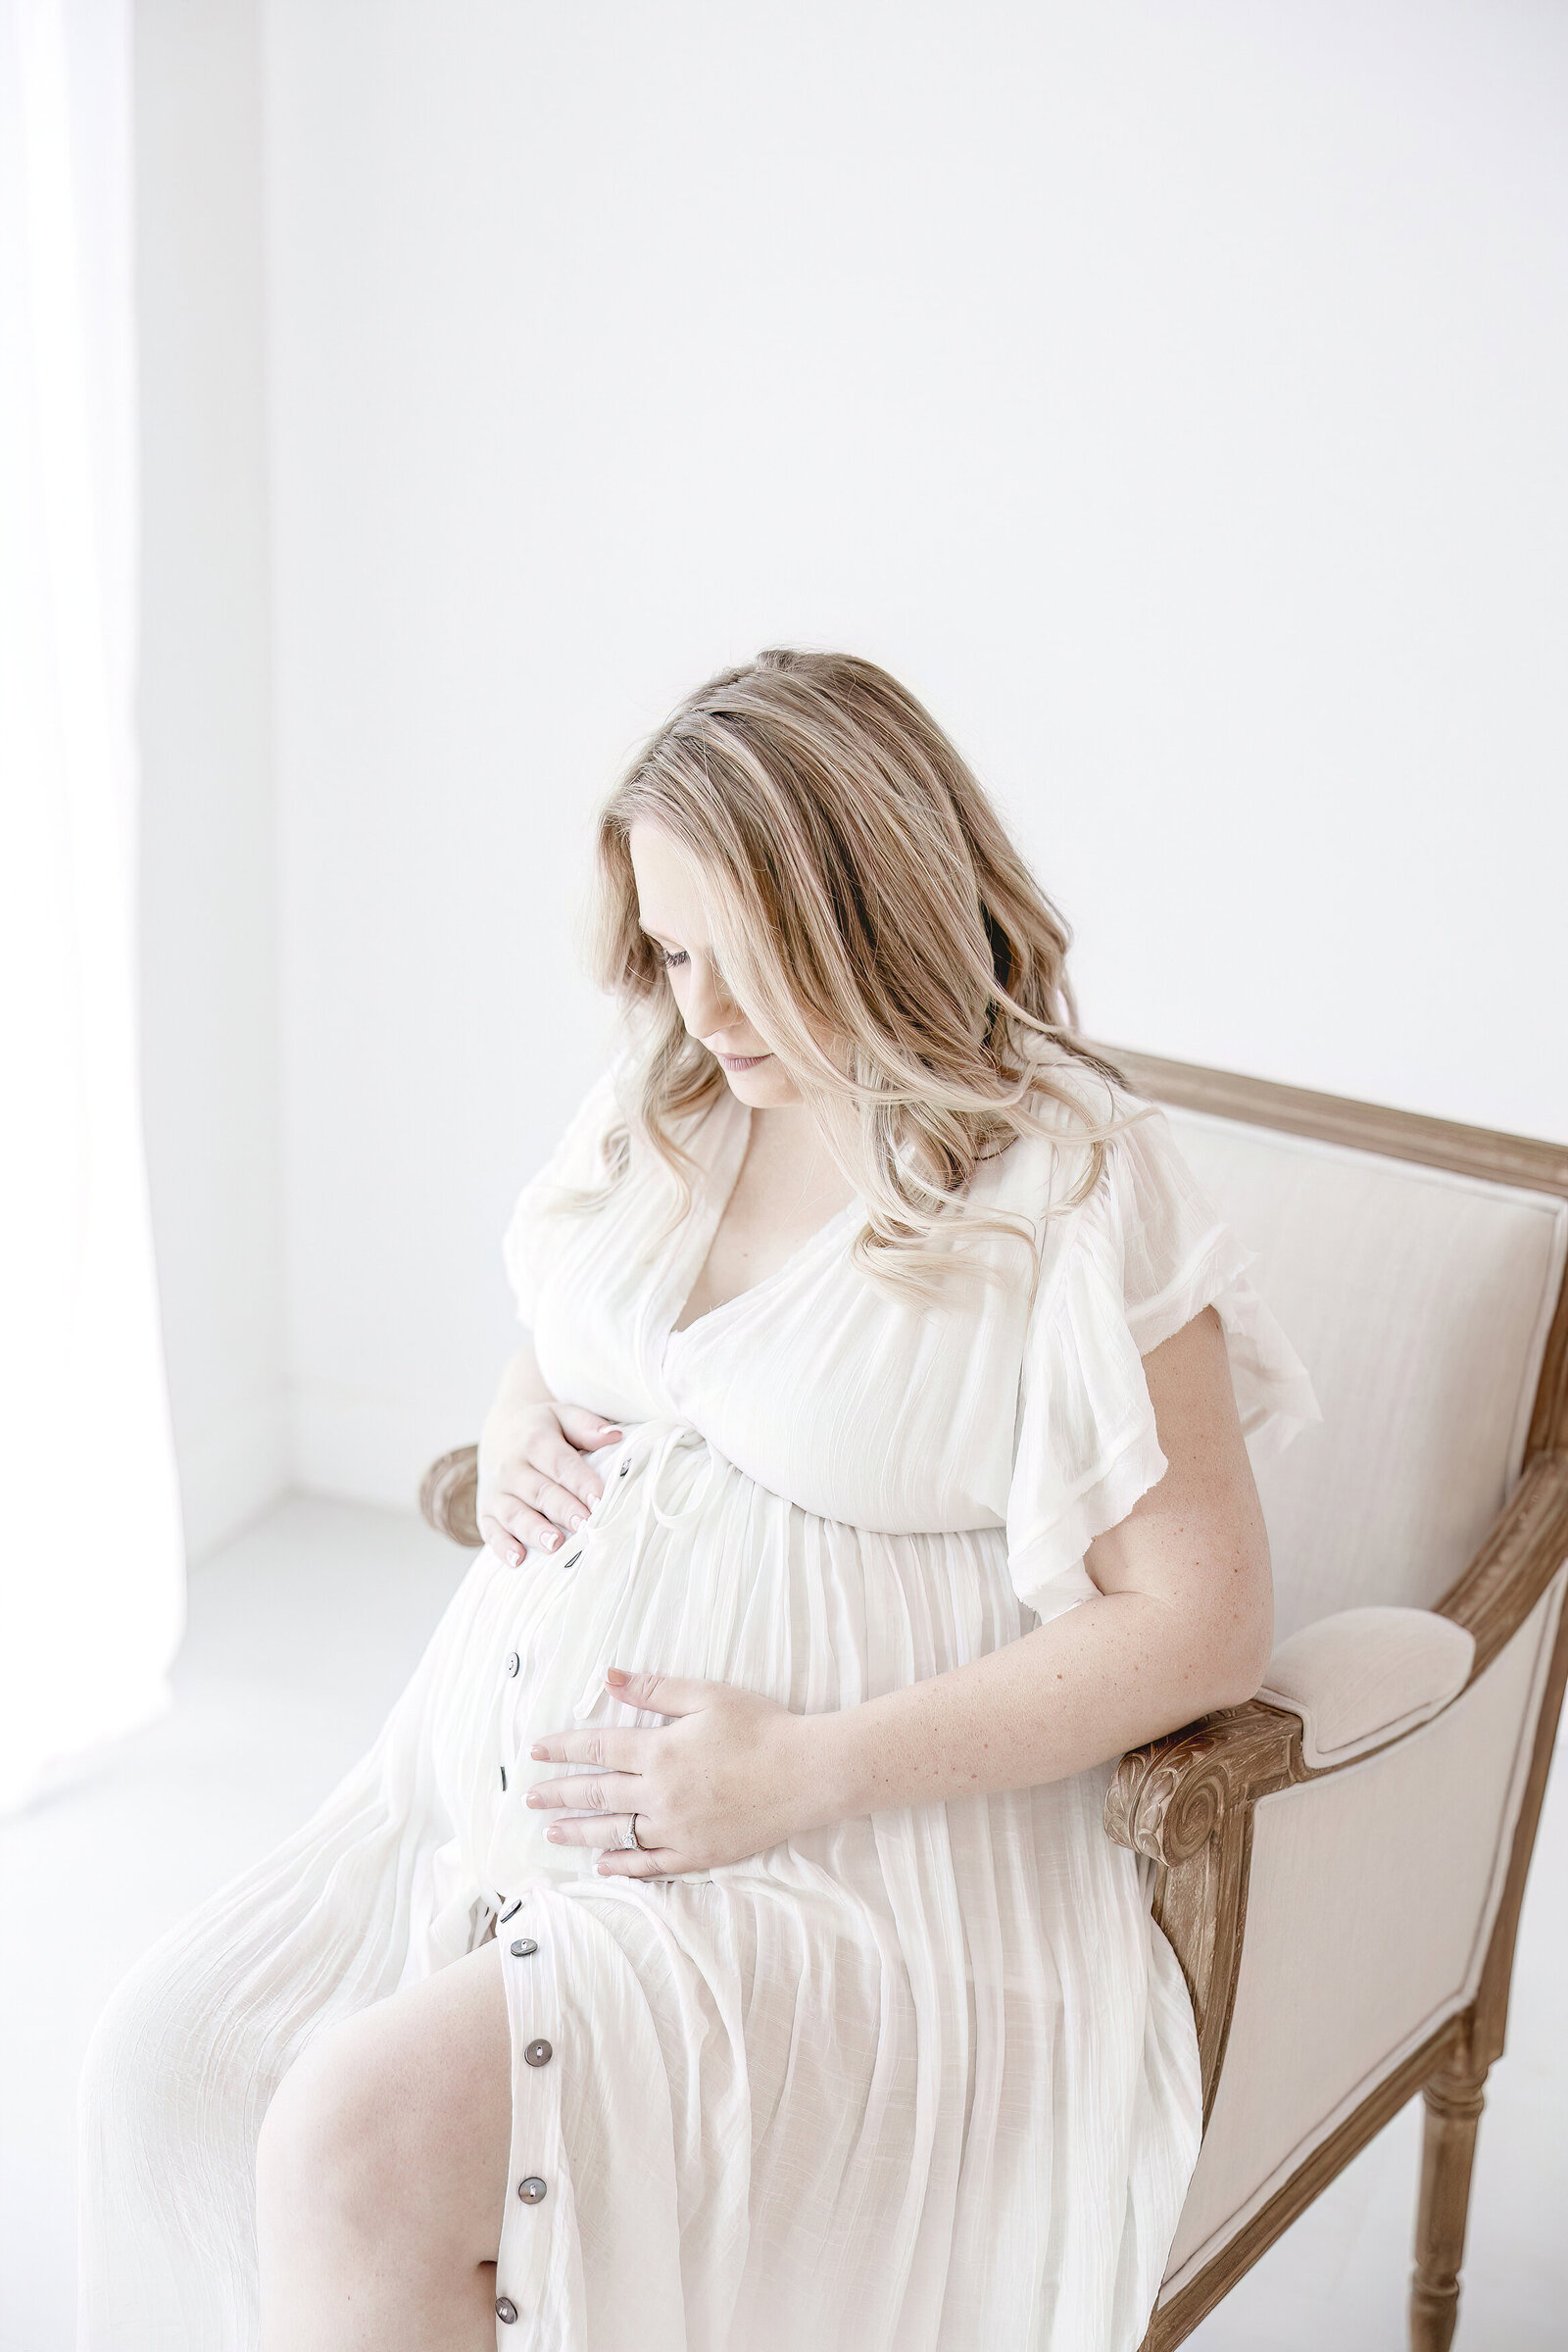 Pregnant woman in white dress sitting in chair